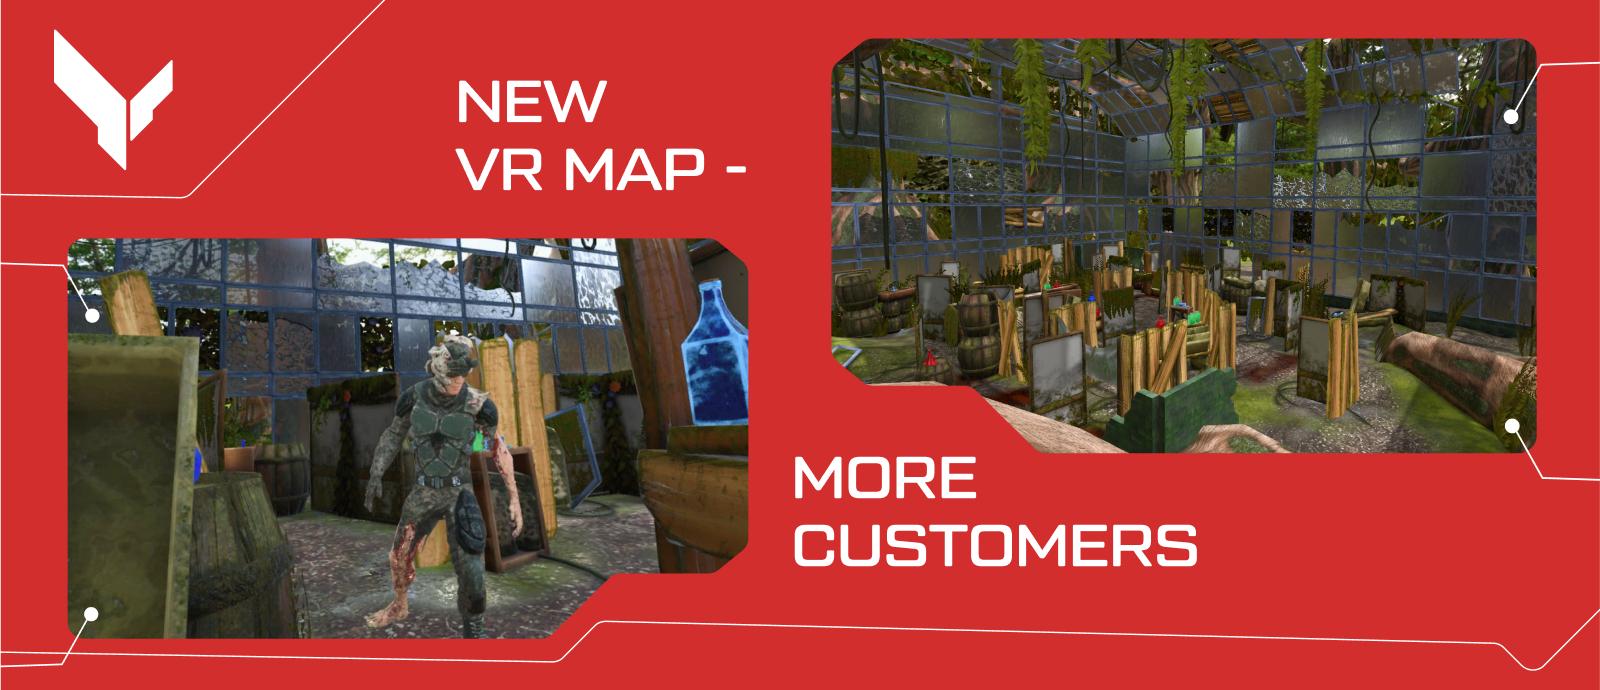 Introducing the New Virtual Reality Map: Greenhouse